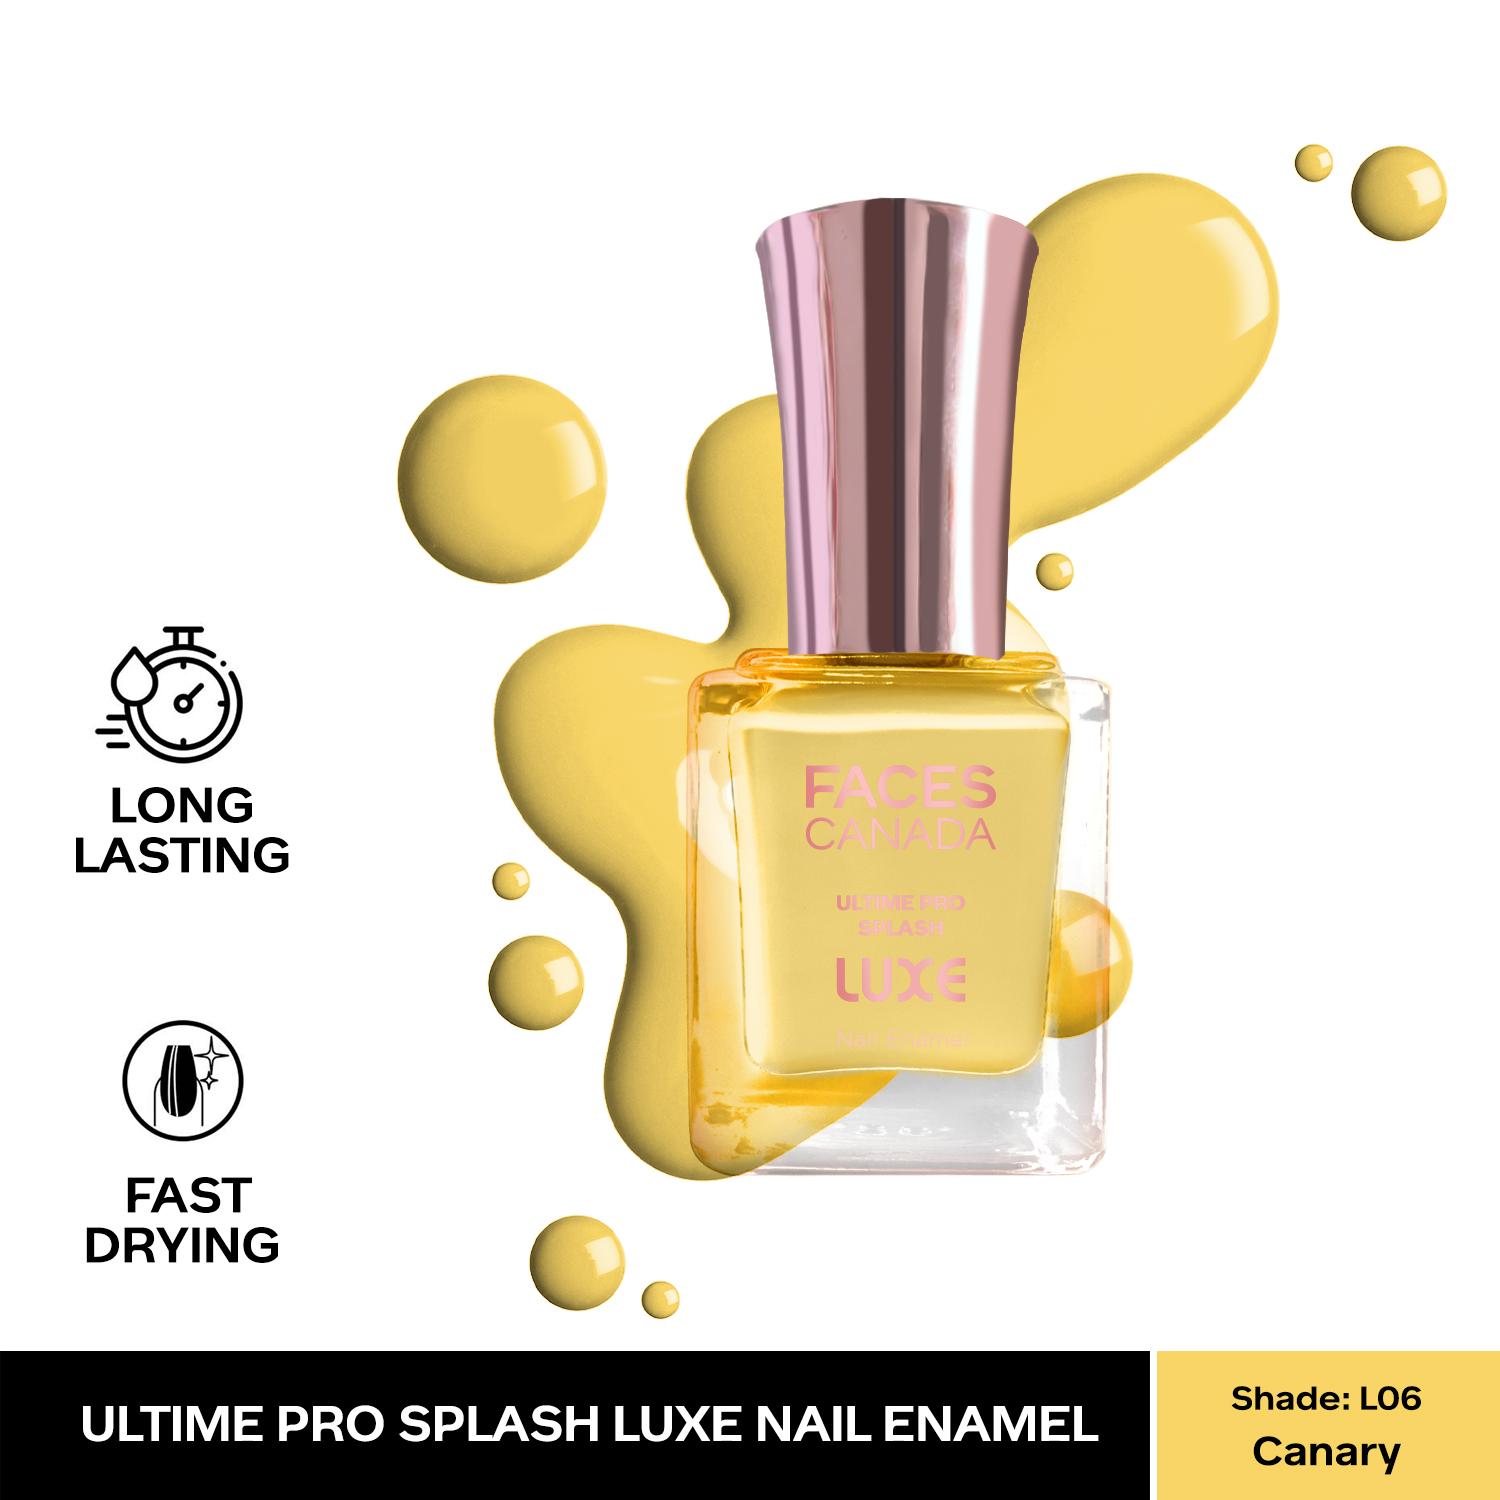 Faces Canada | Faces Canada Ultime Pro Splash Luxe Nail Enamel - Canary (L06), Glossy Finish, Quick Drying (12 ml)